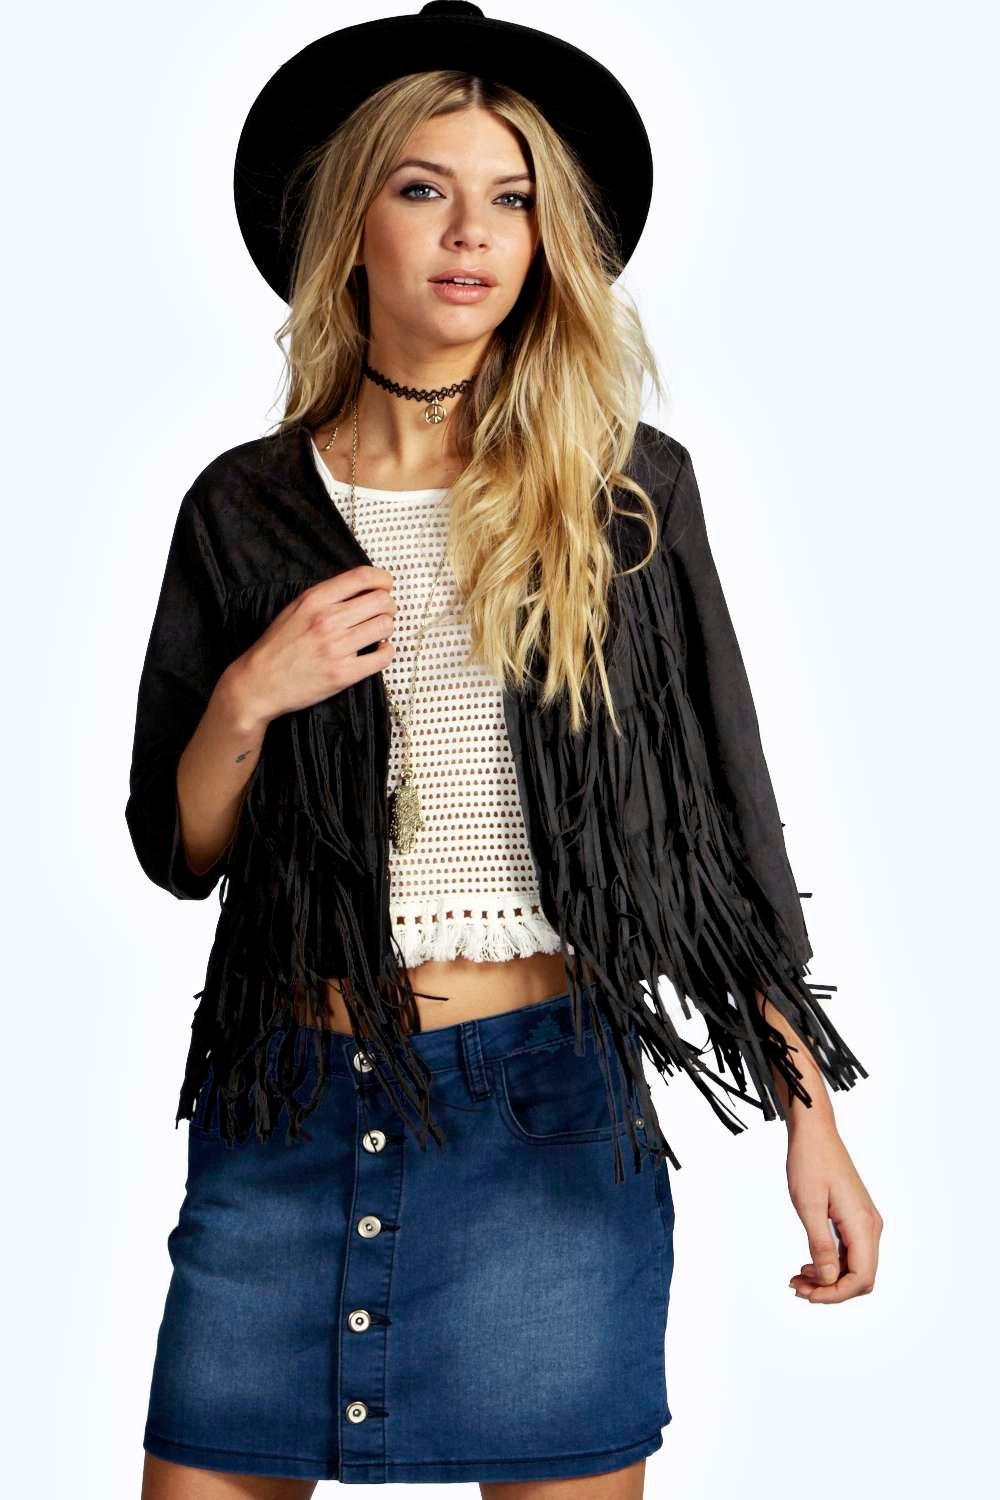 Amy Fringed Suedette Jacket at boohoo.com